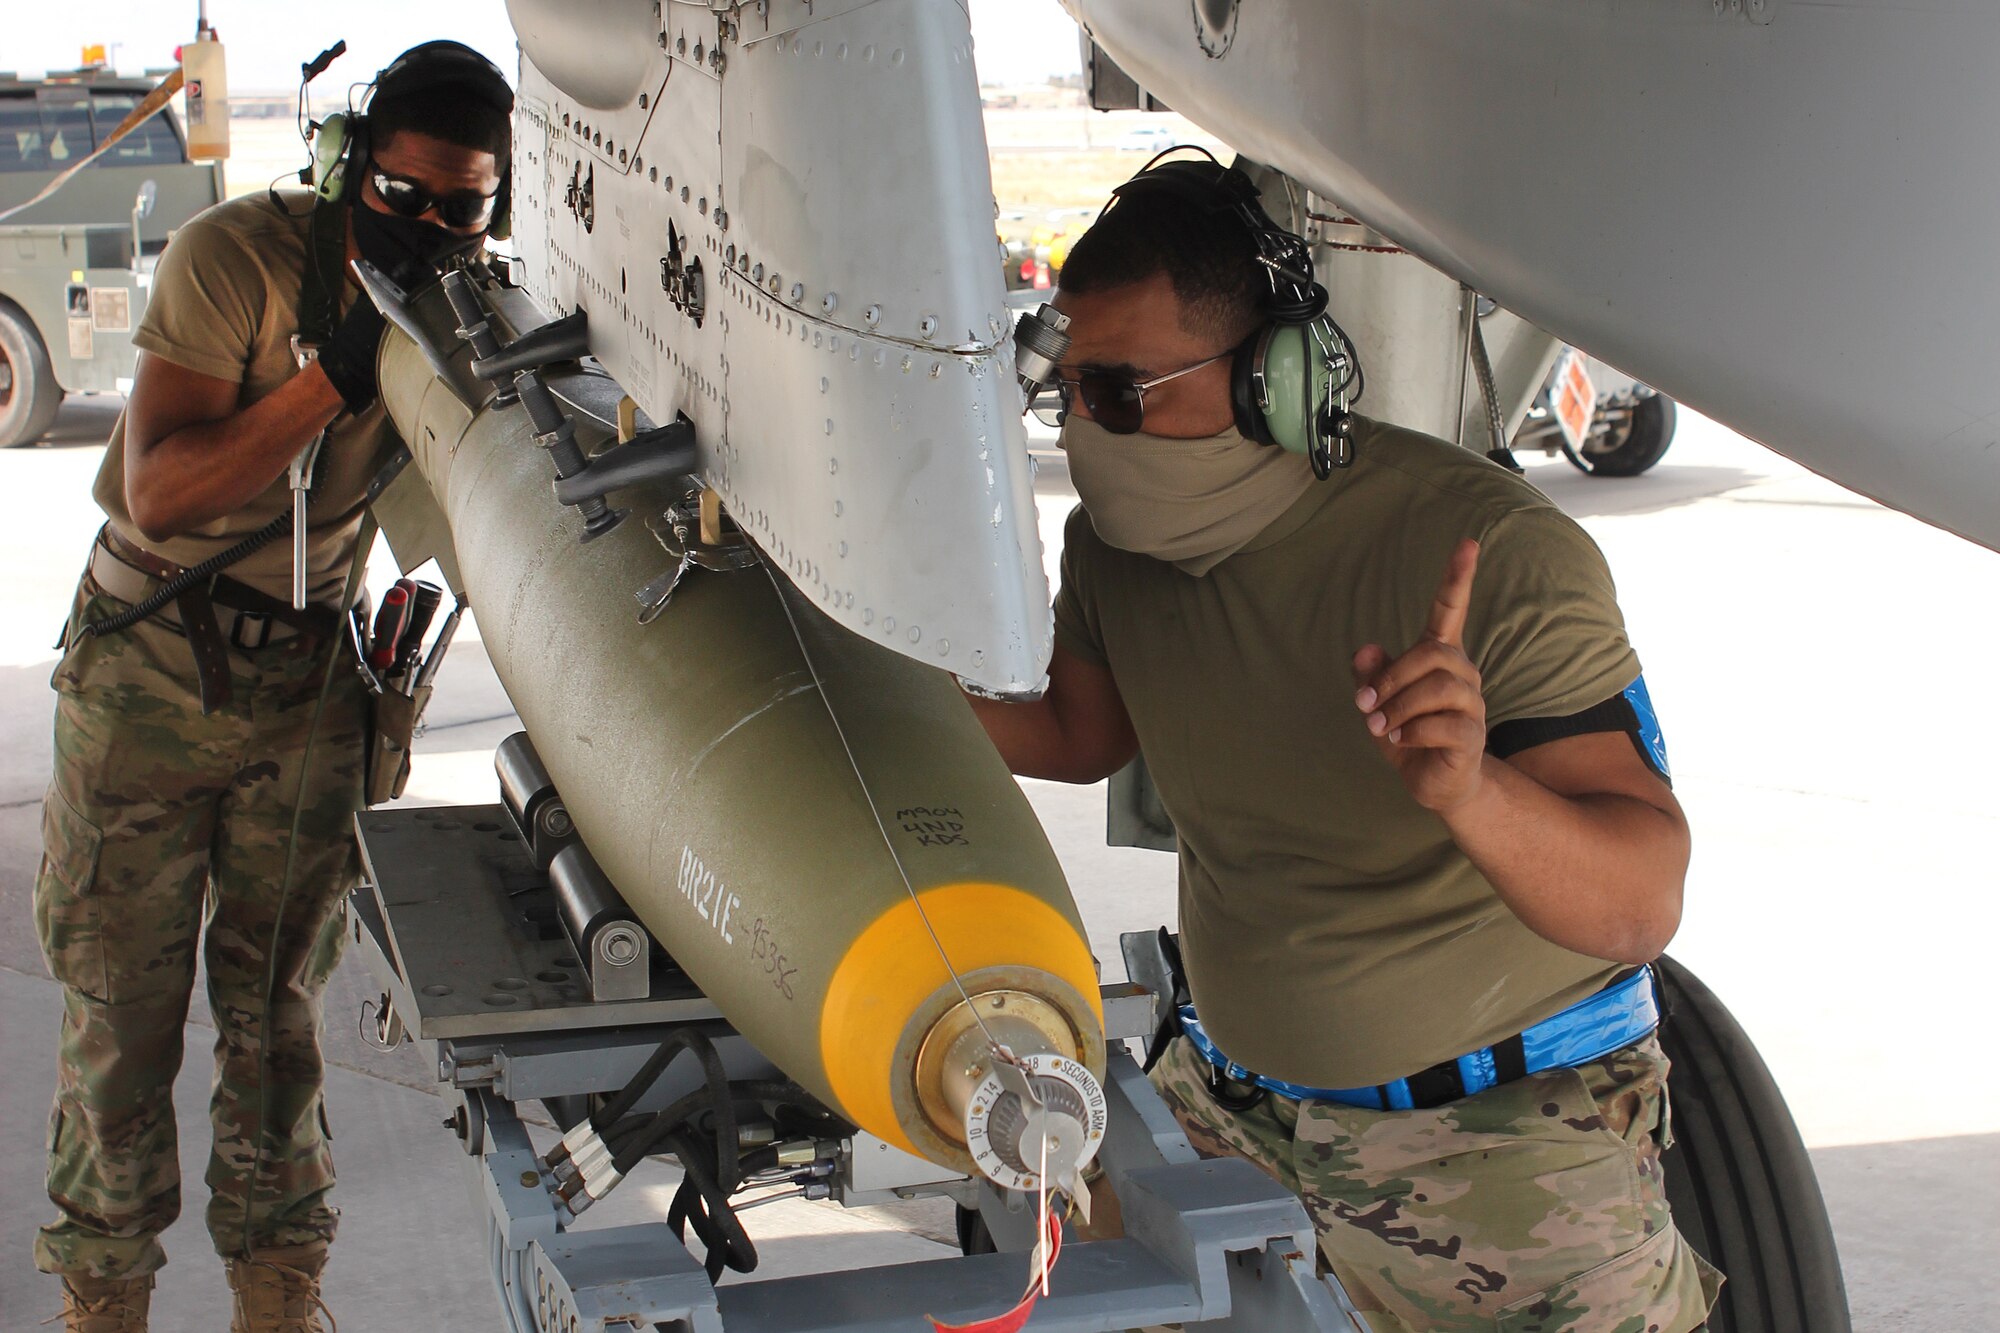 Senior Airman Maurice Starks and Staff Sgt. Omari Castleberry, both from the 127th Wiing, load a bomb unto a A-10 Thunderbolt II aircraft at Nellis Air Force Base, Nev., April 9, 2021.